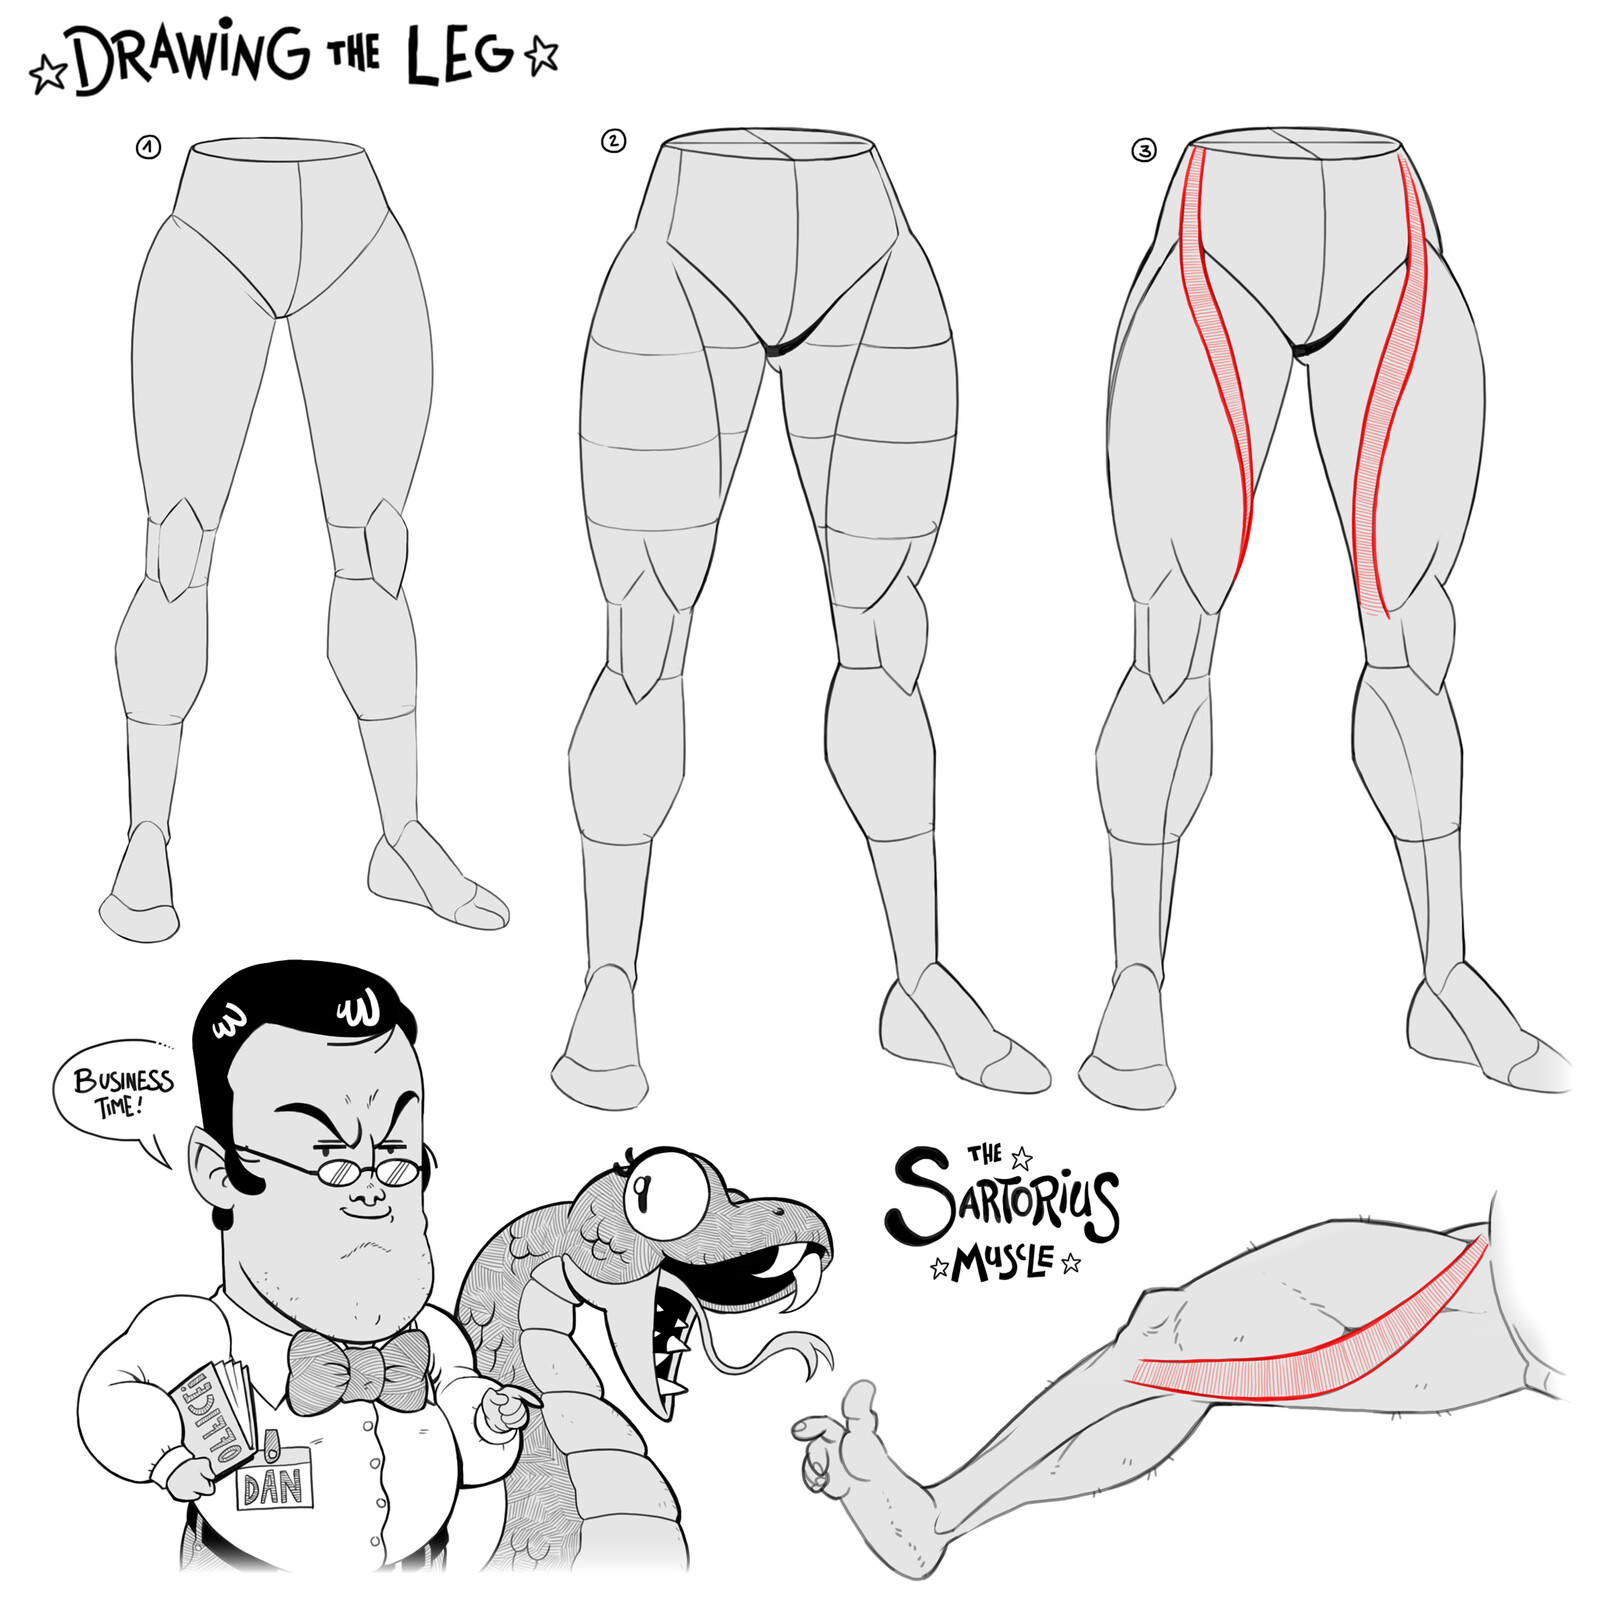 How to draw Legs and the Sartorius Muscle